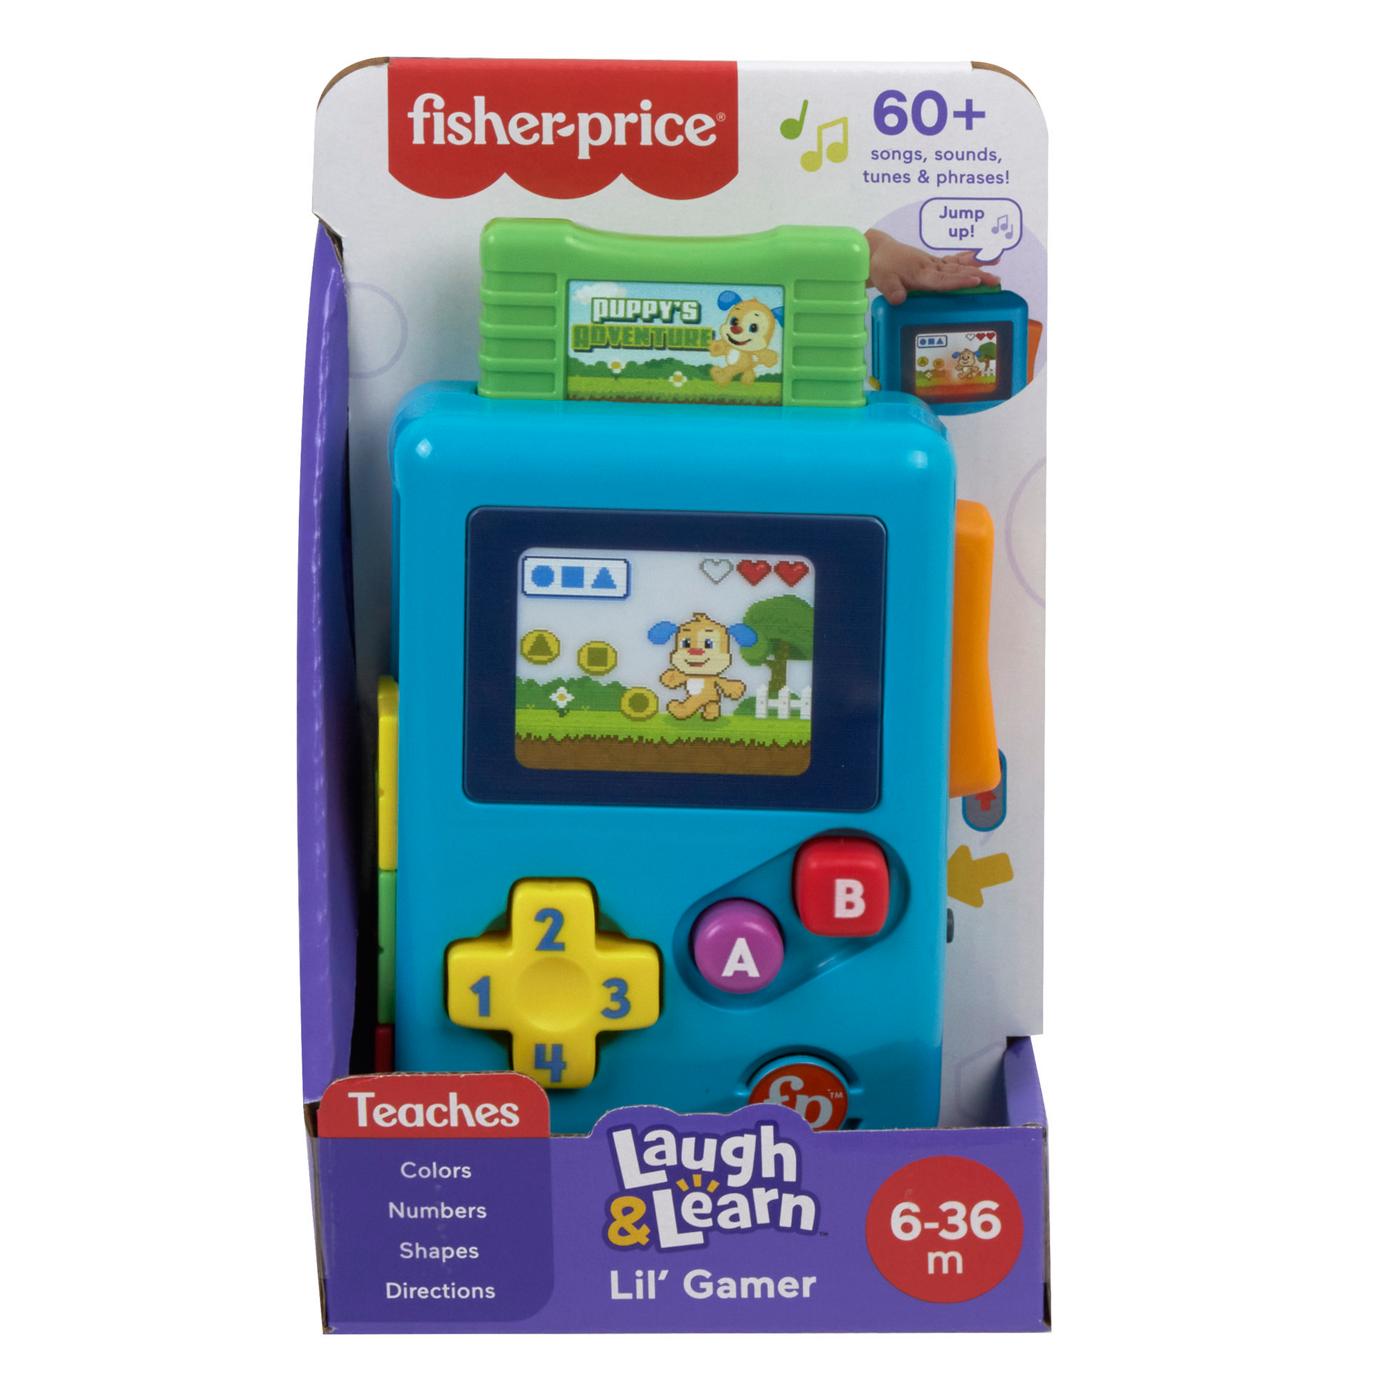 Fisher-Price Laugh & Learn Lil' Gamer; image 1 of 2